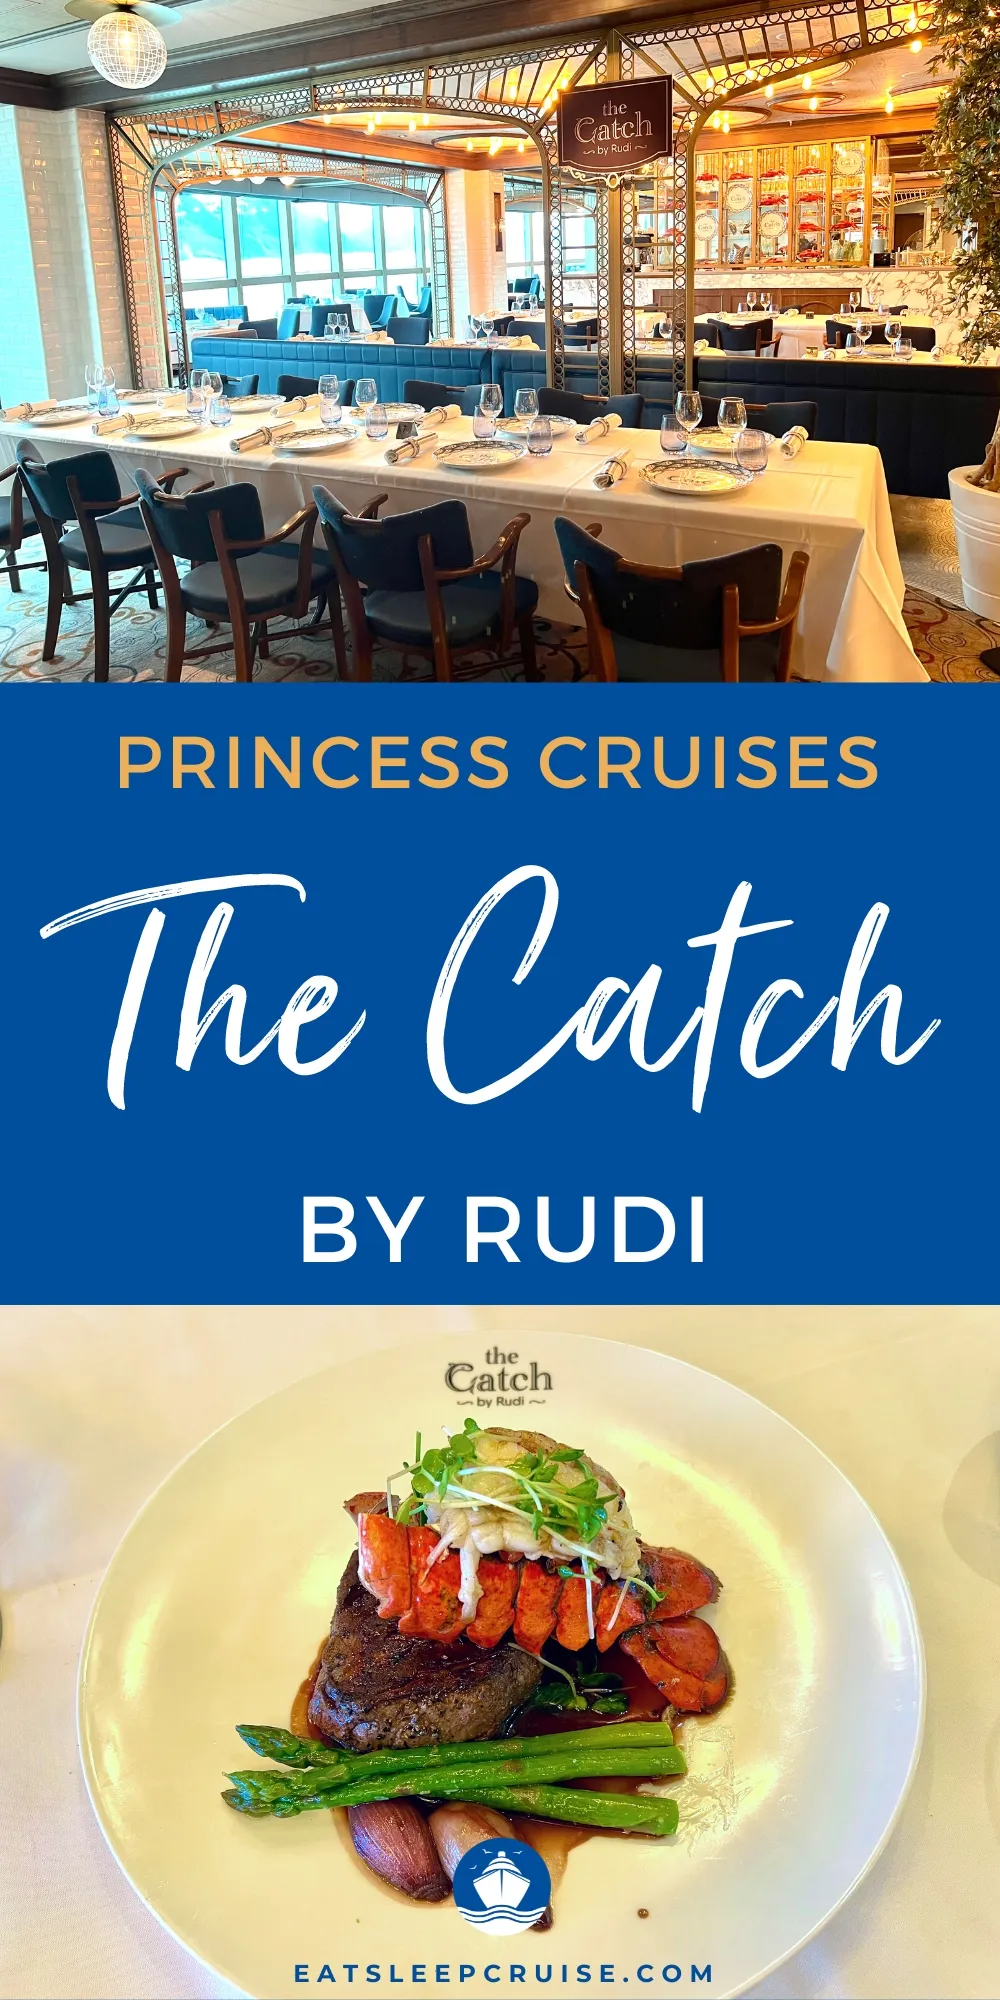 We Just Dined at The Catch by Rudi on Princess Cruises!